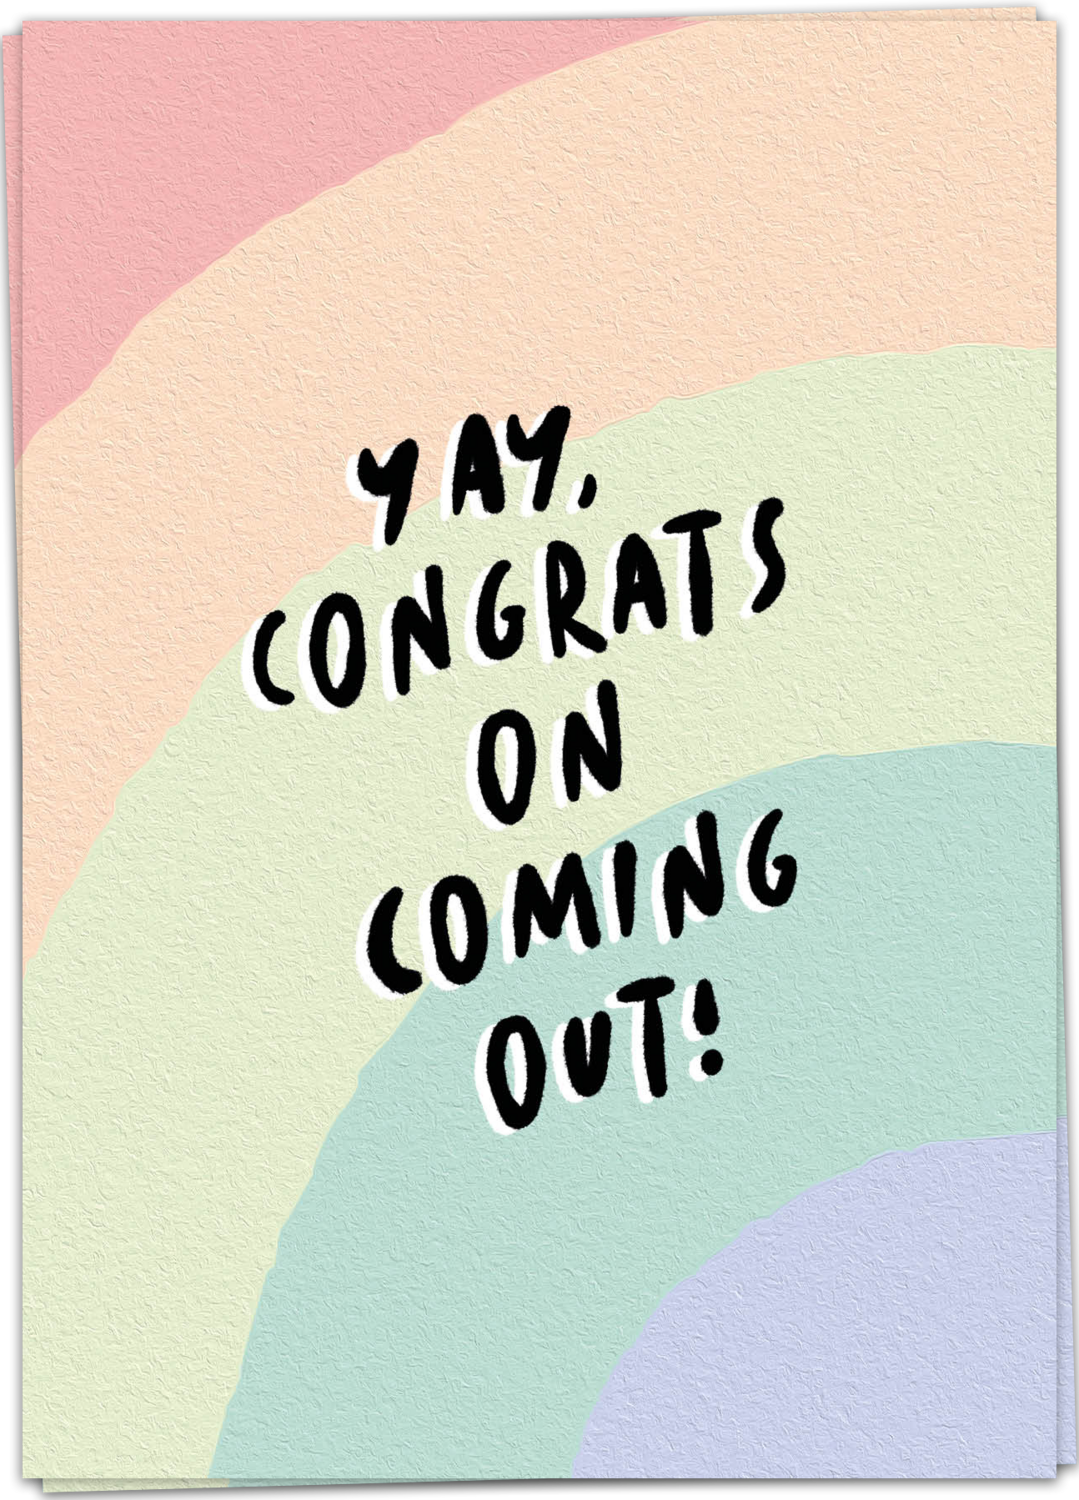 Yay, congrats on coming out